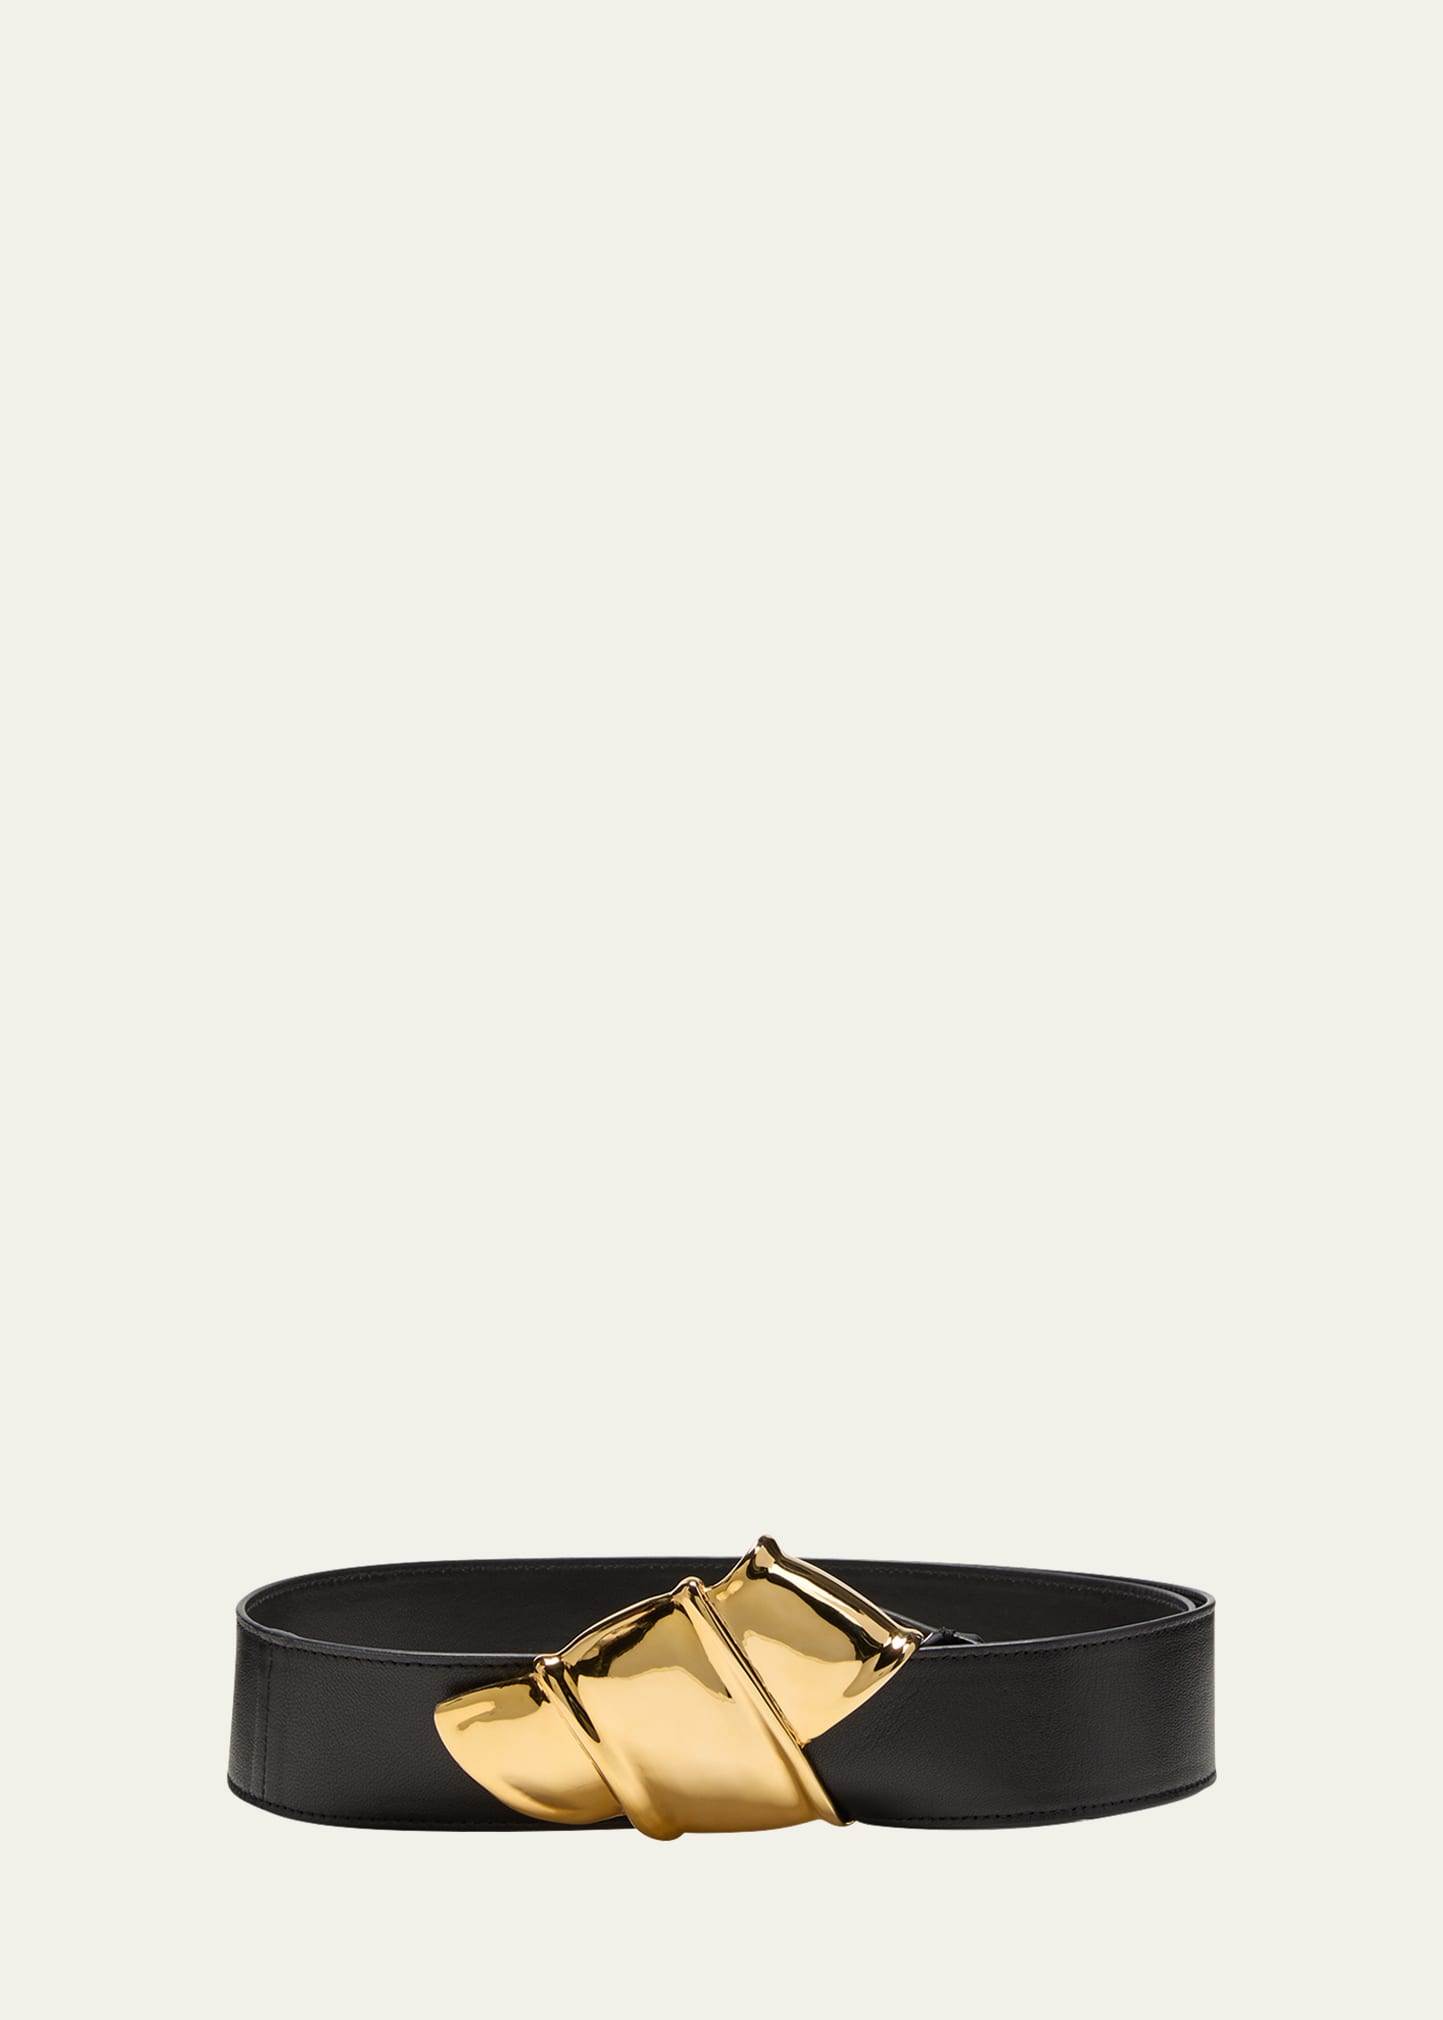 Brandon Maxwell Gold Knotted Leather Belt In Black Gold